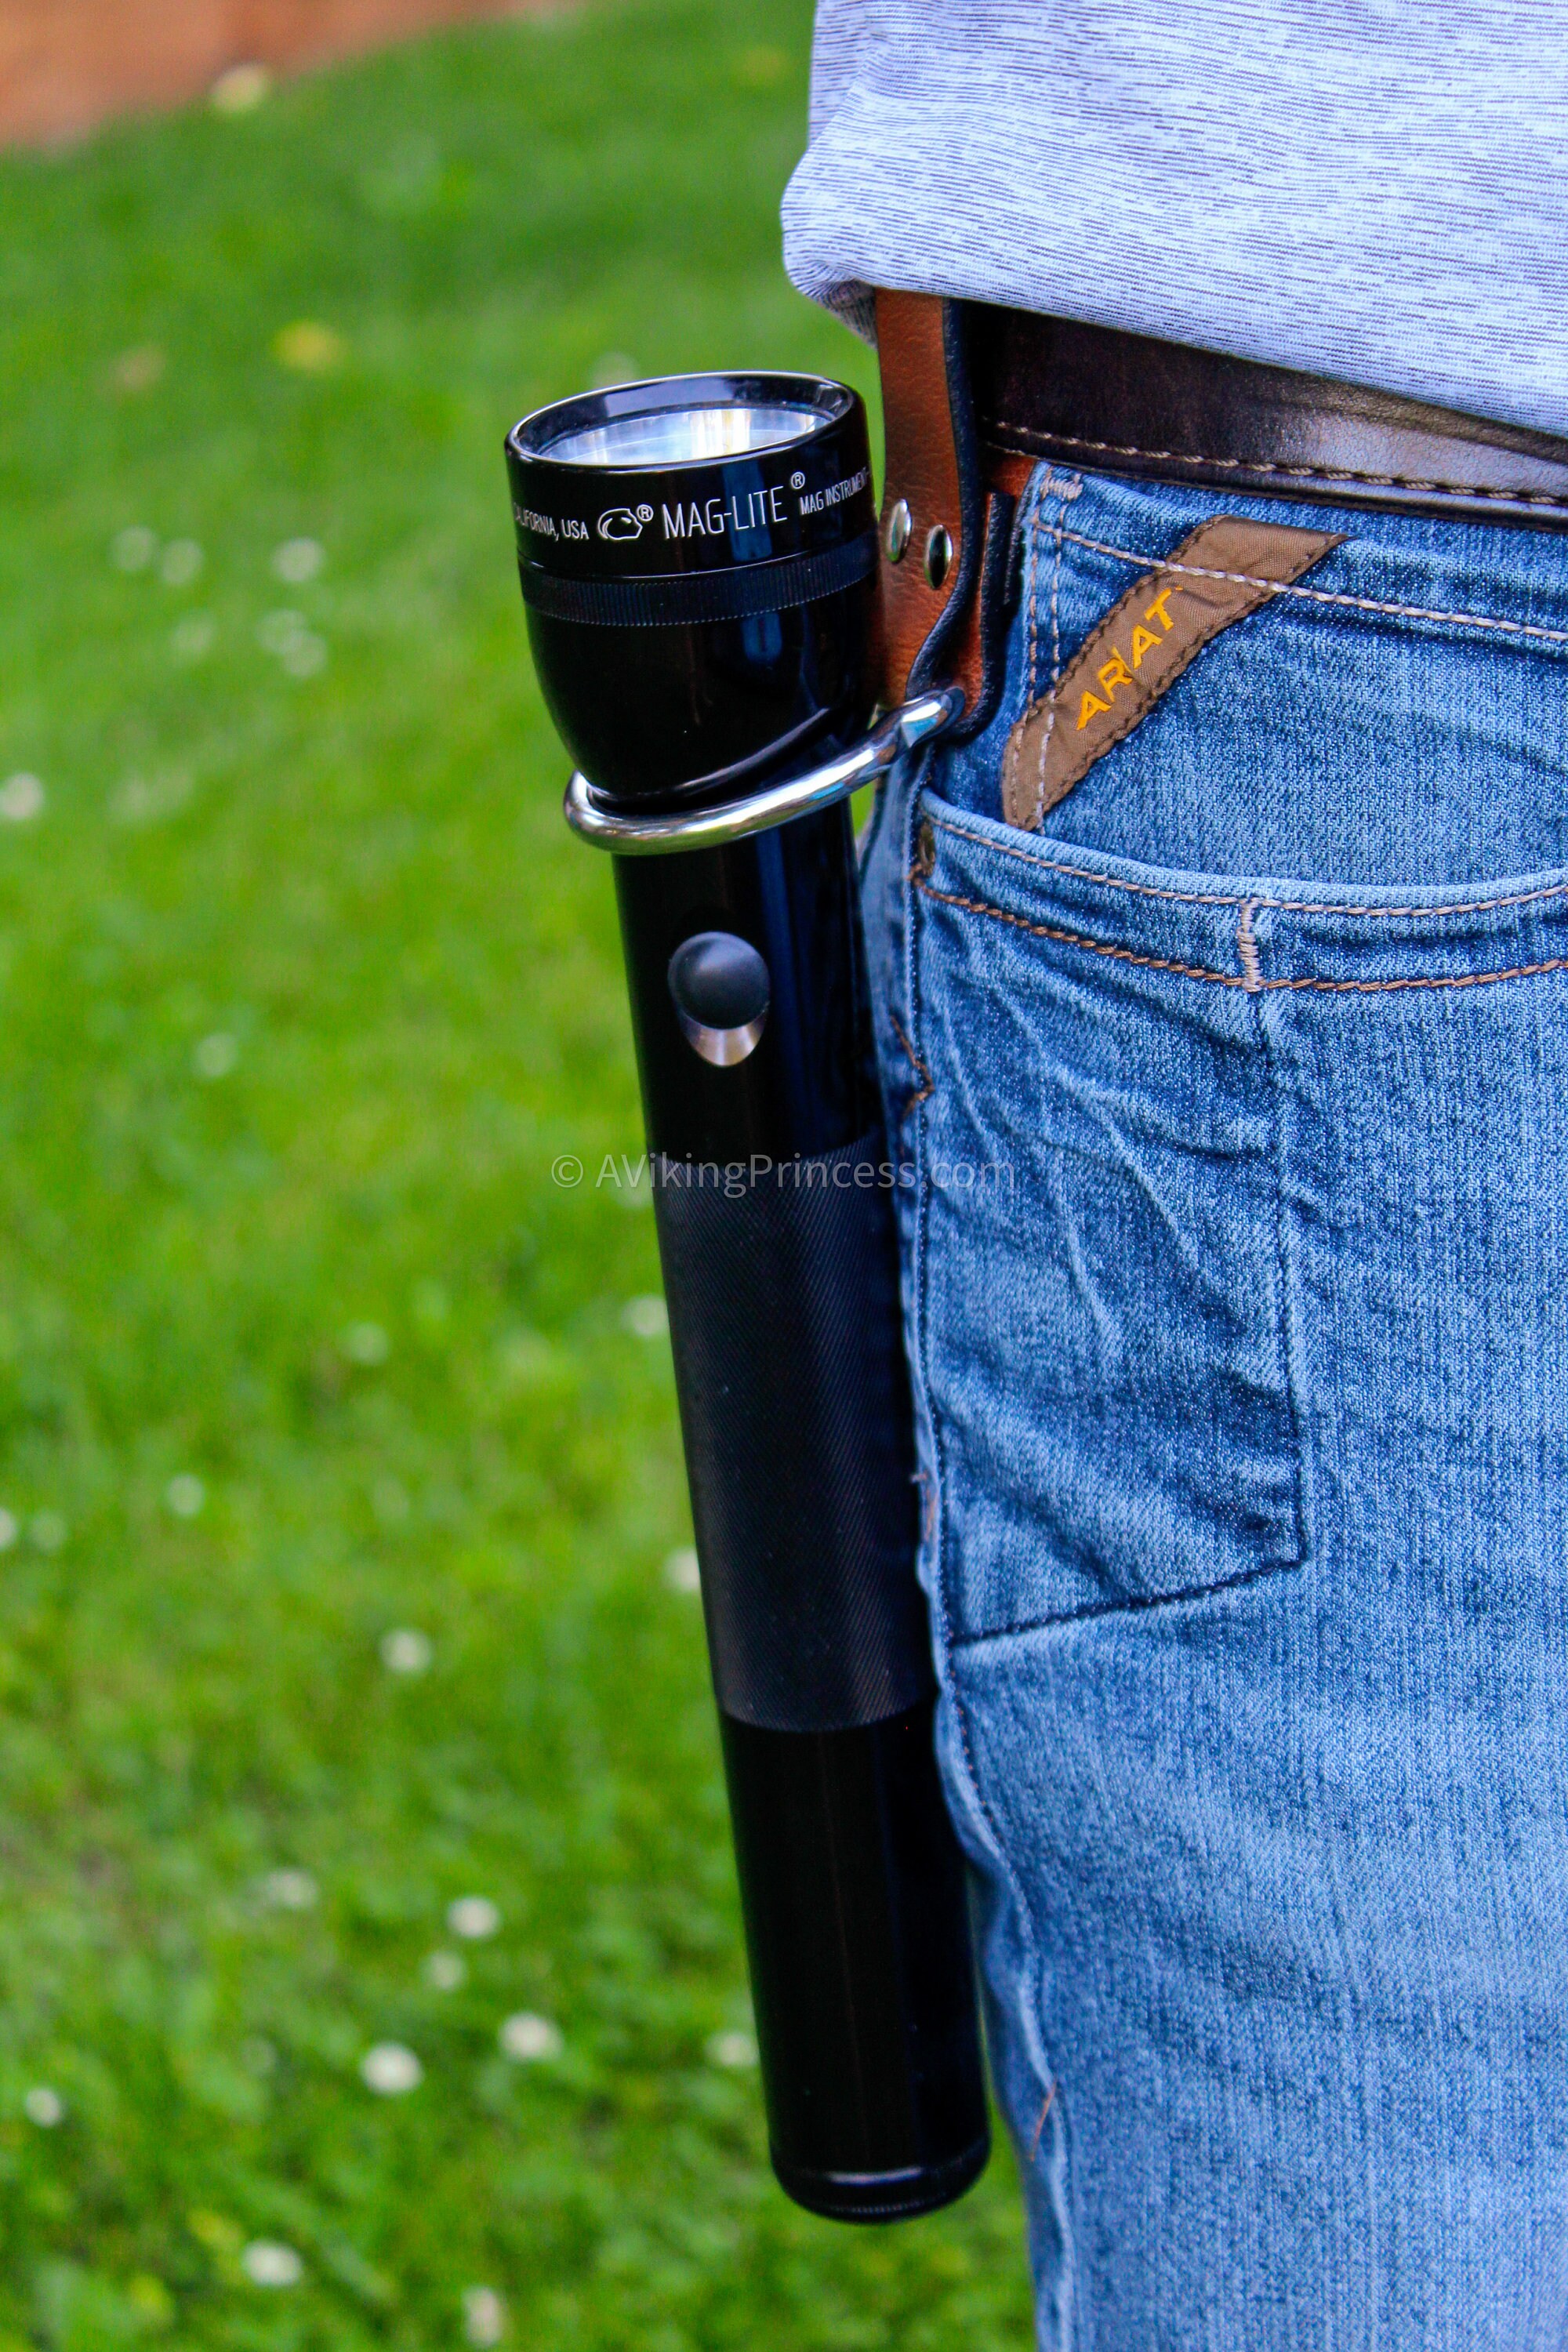 LAMPE MAGLITE COMBO HOLSTER